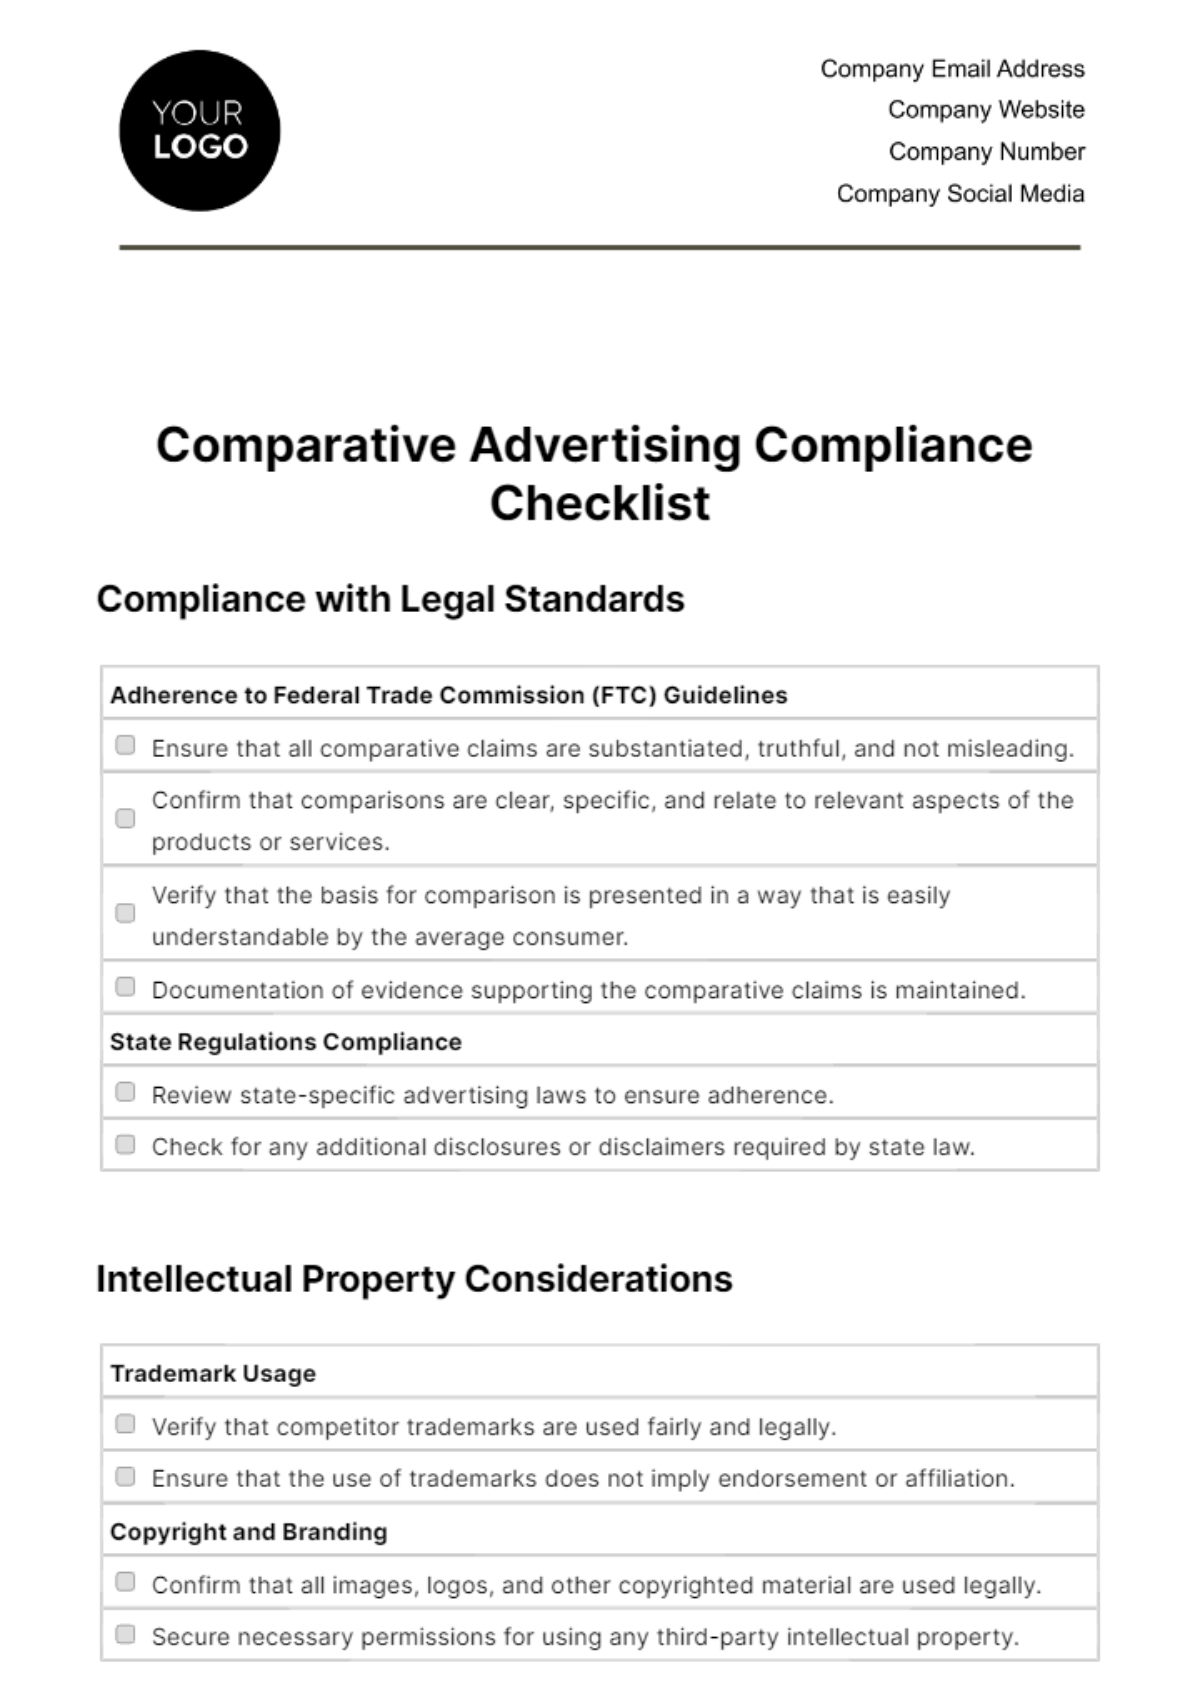 Free Comparative Advertising Compliance Checklist Template